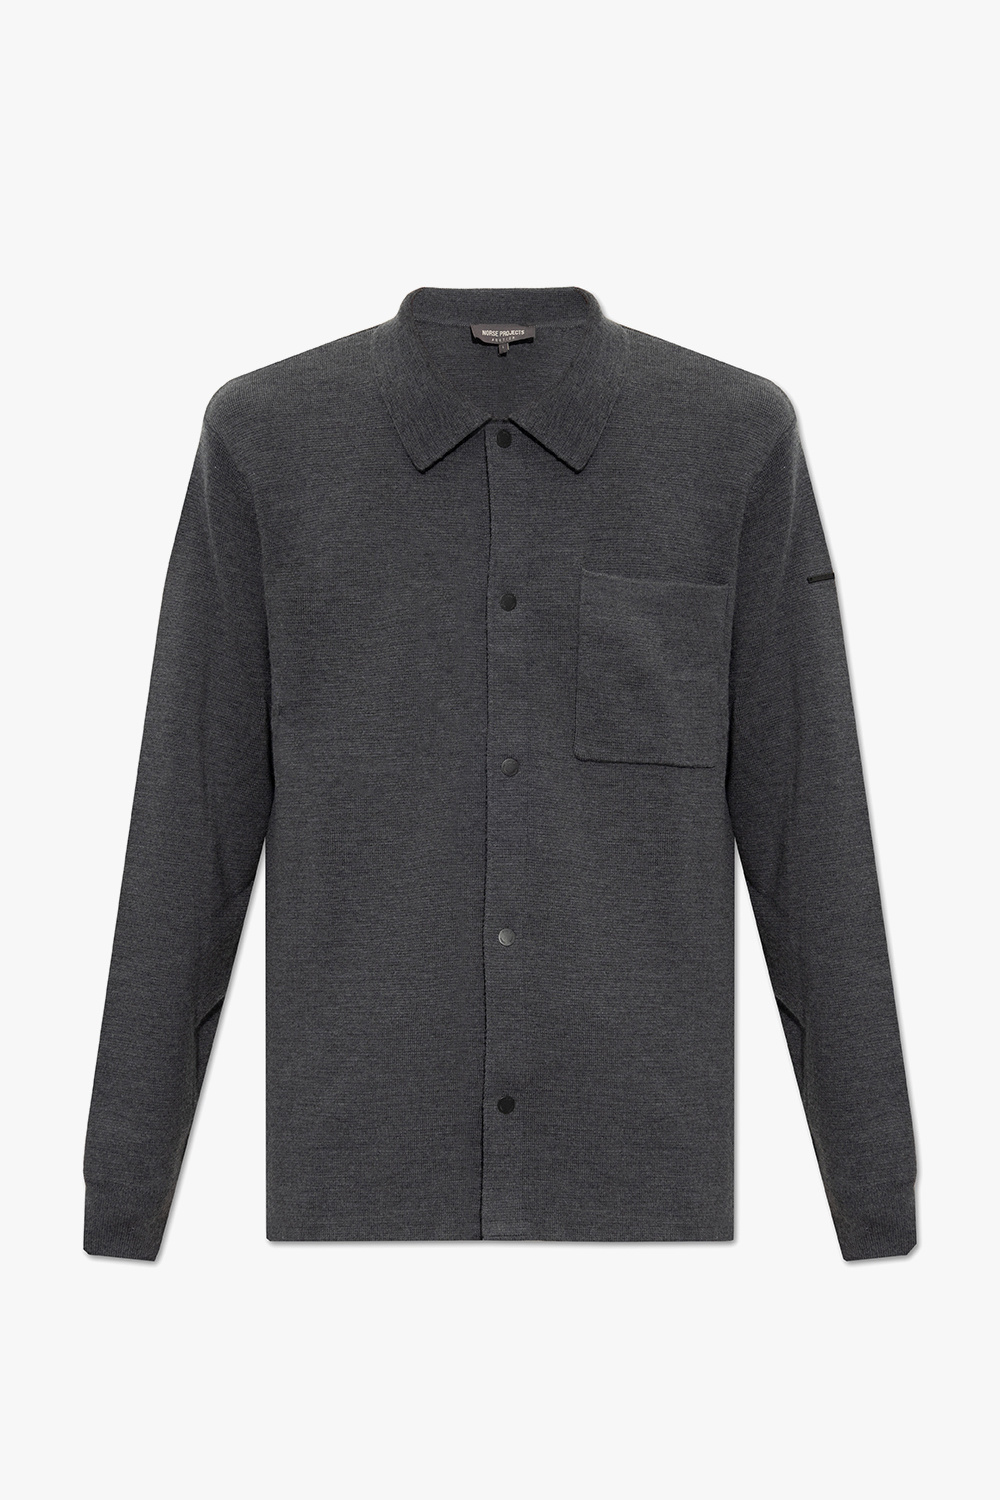 Norse Projects Cardigan with snap closures